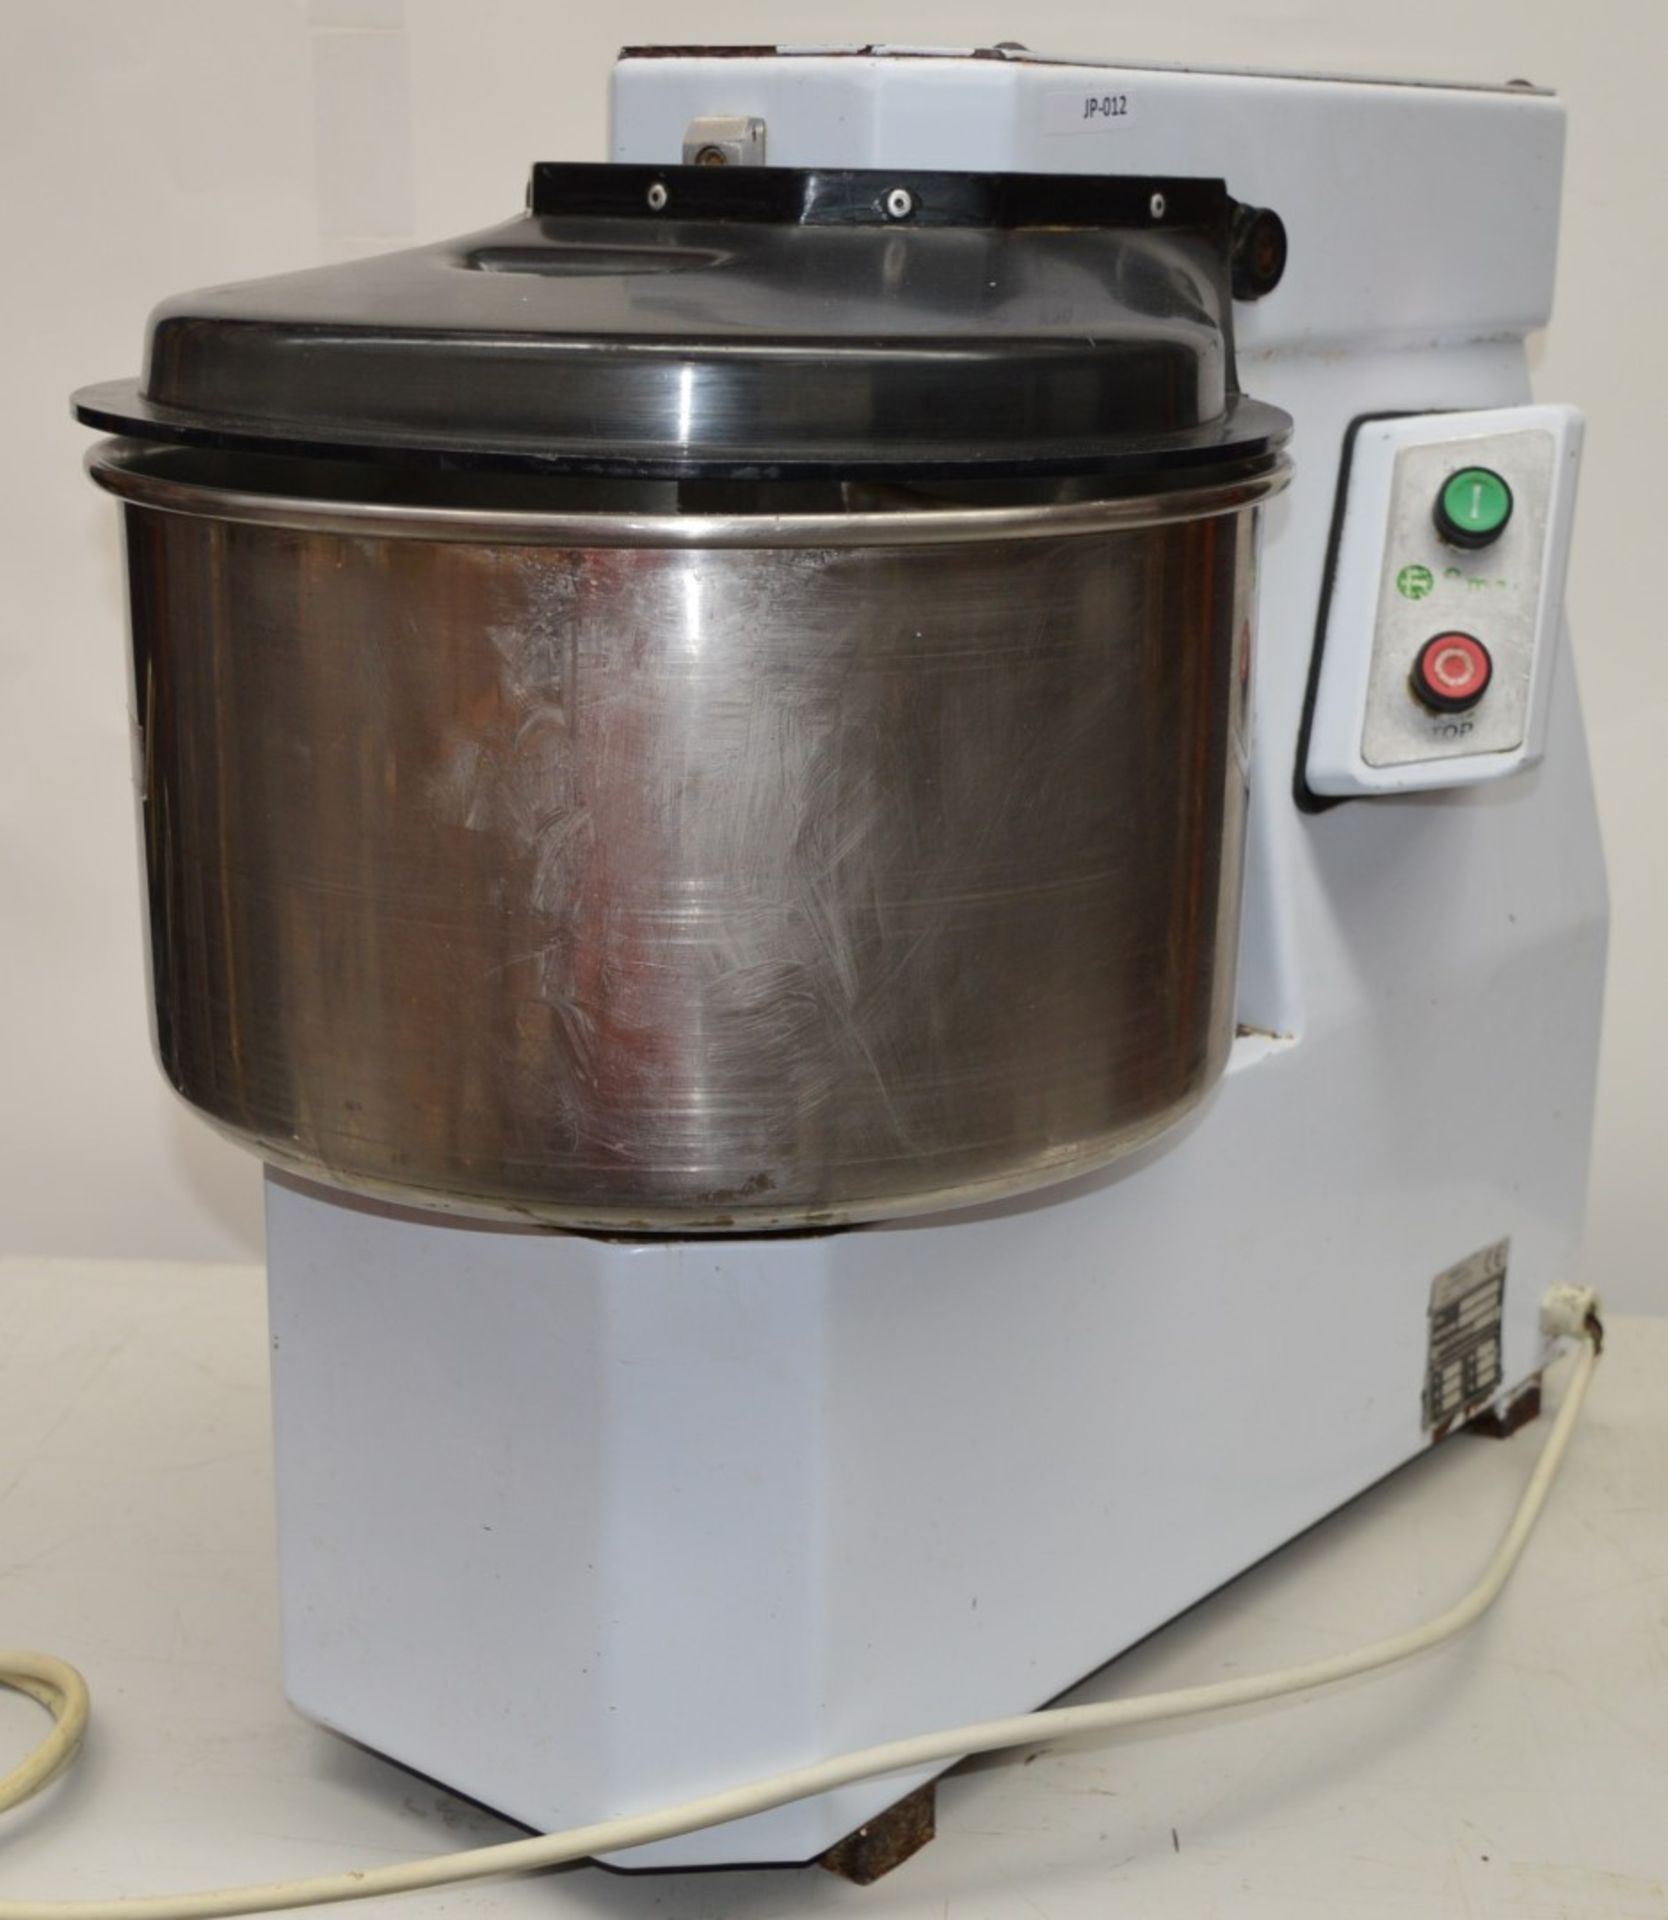 1 x Fimar Spiral Hook Dough Mixer - Type 1MP 16/S - Made in Italy - Heavy Duty Construction - H58 - Image 8 of 10